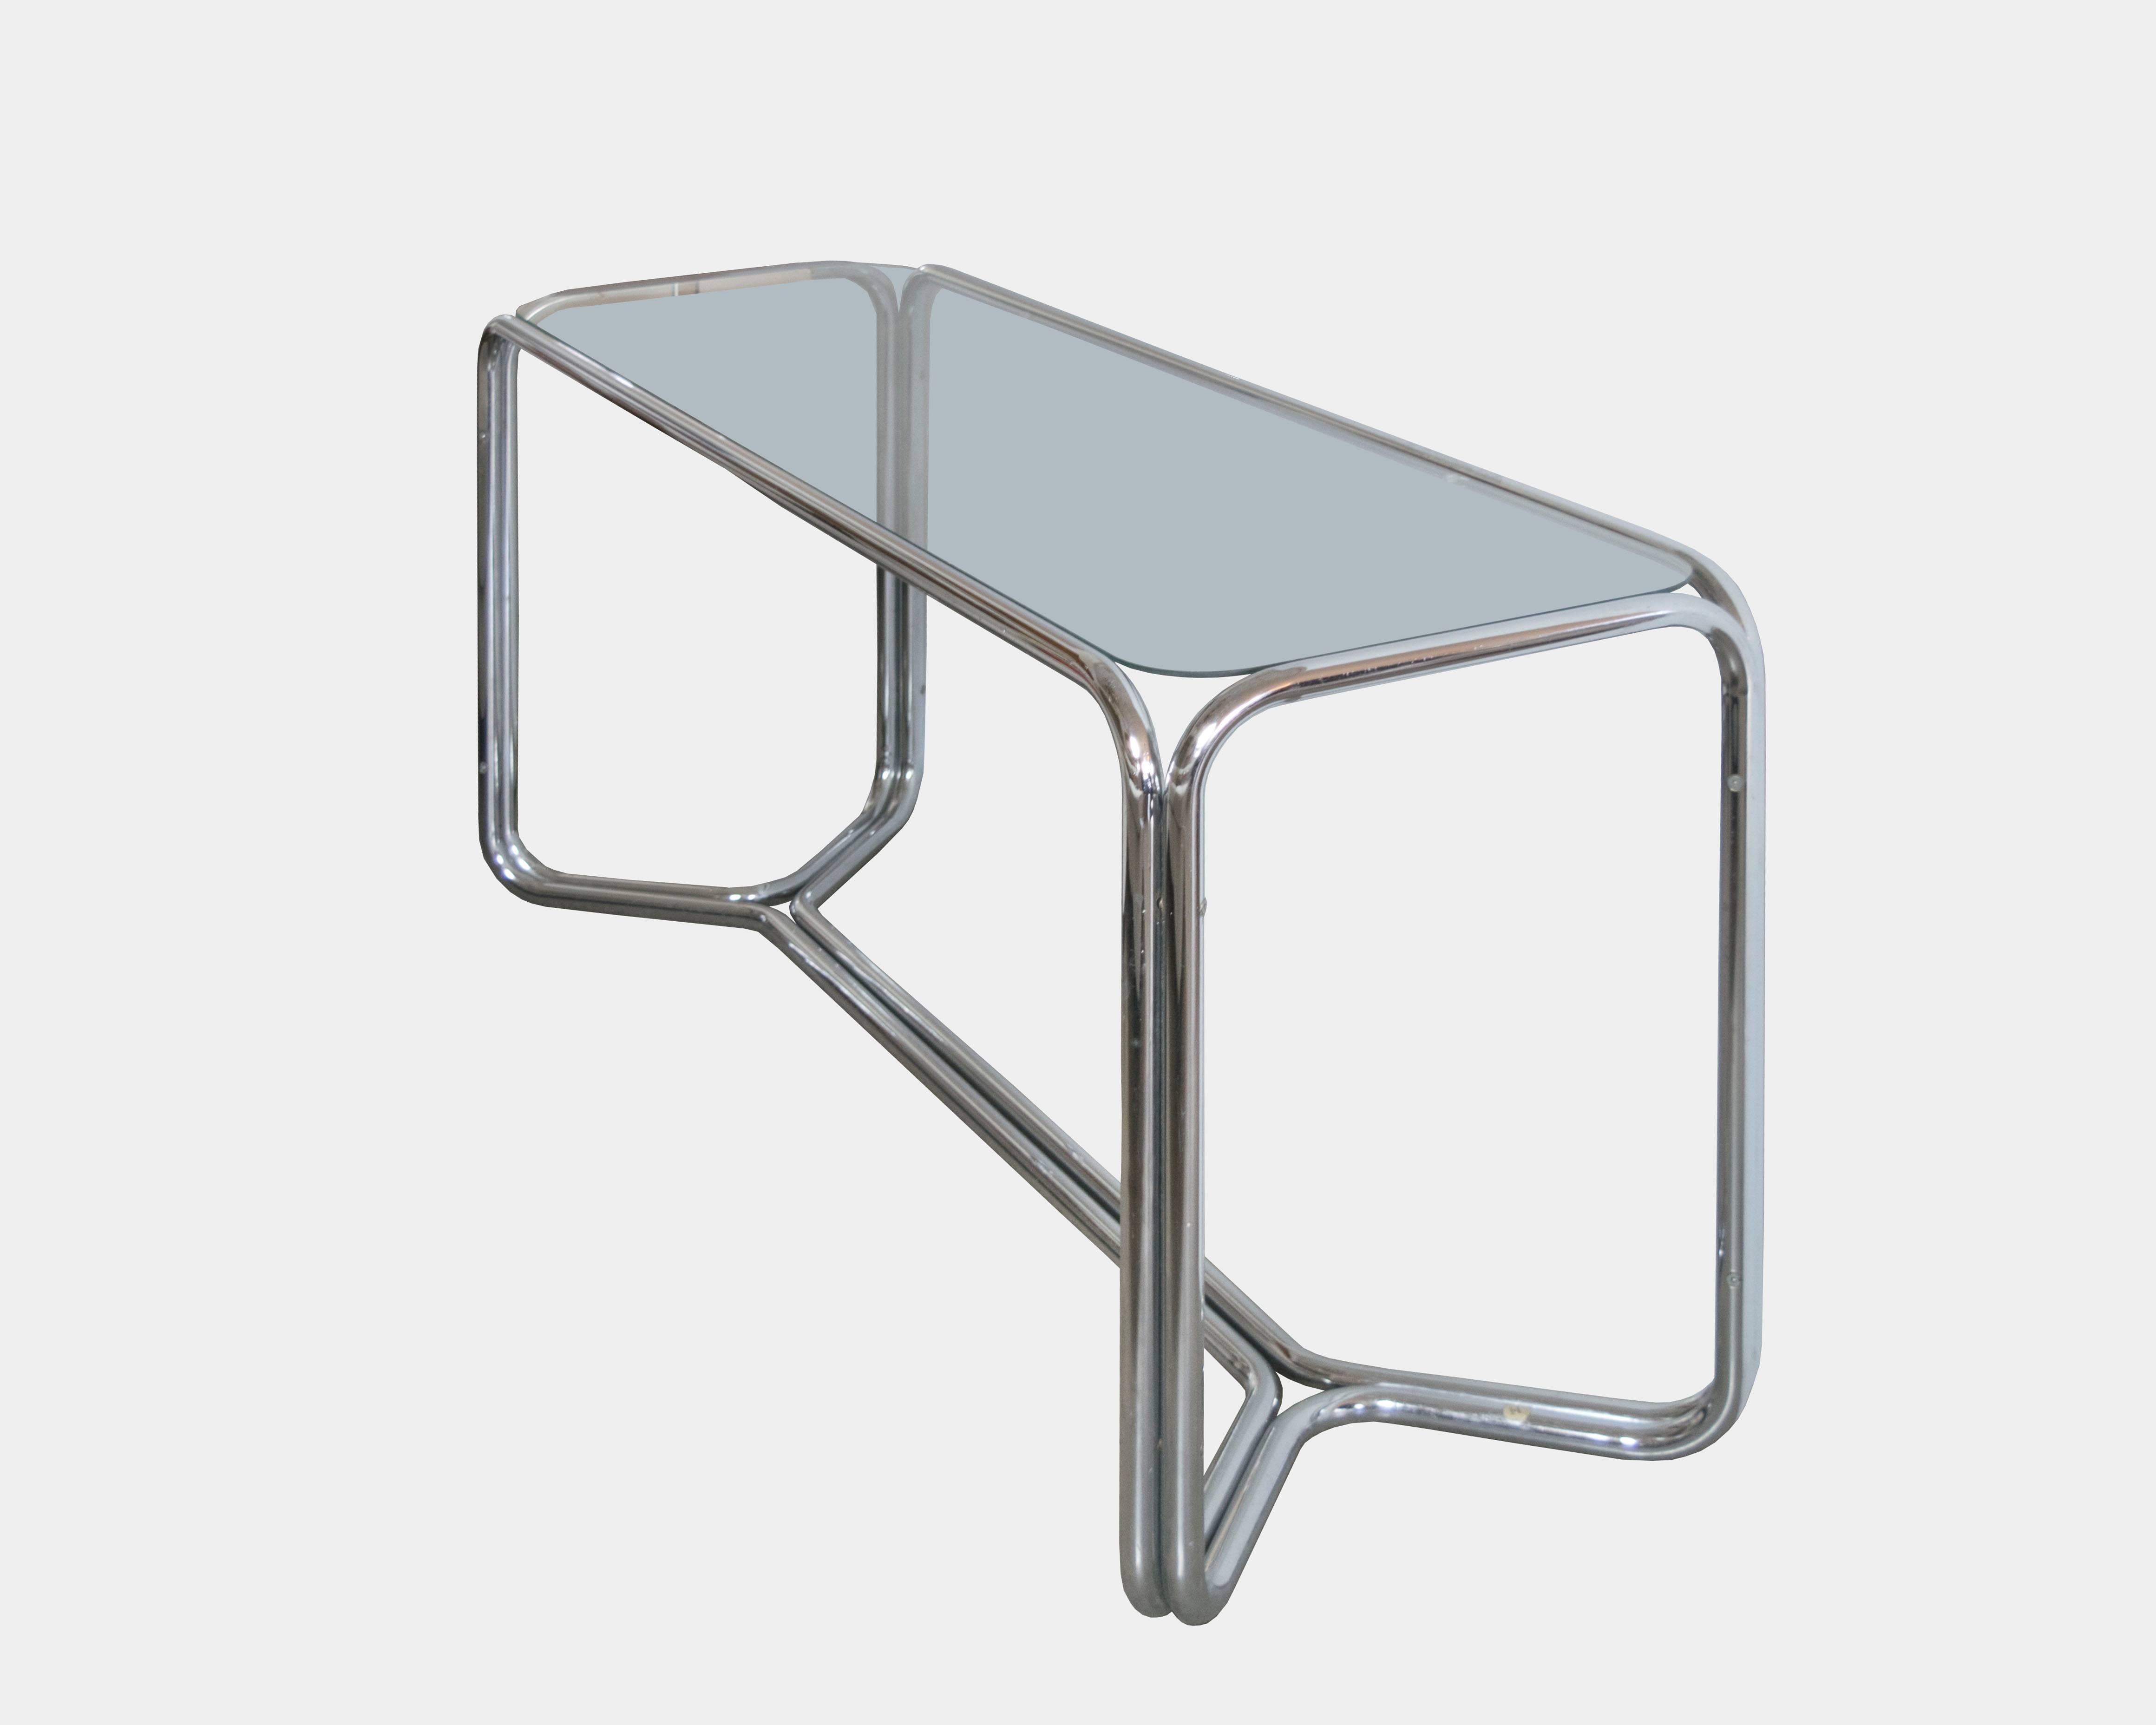 Gorgeous Italian design of double bands of polished chrome create a sculptural double wide base in excellent condition.